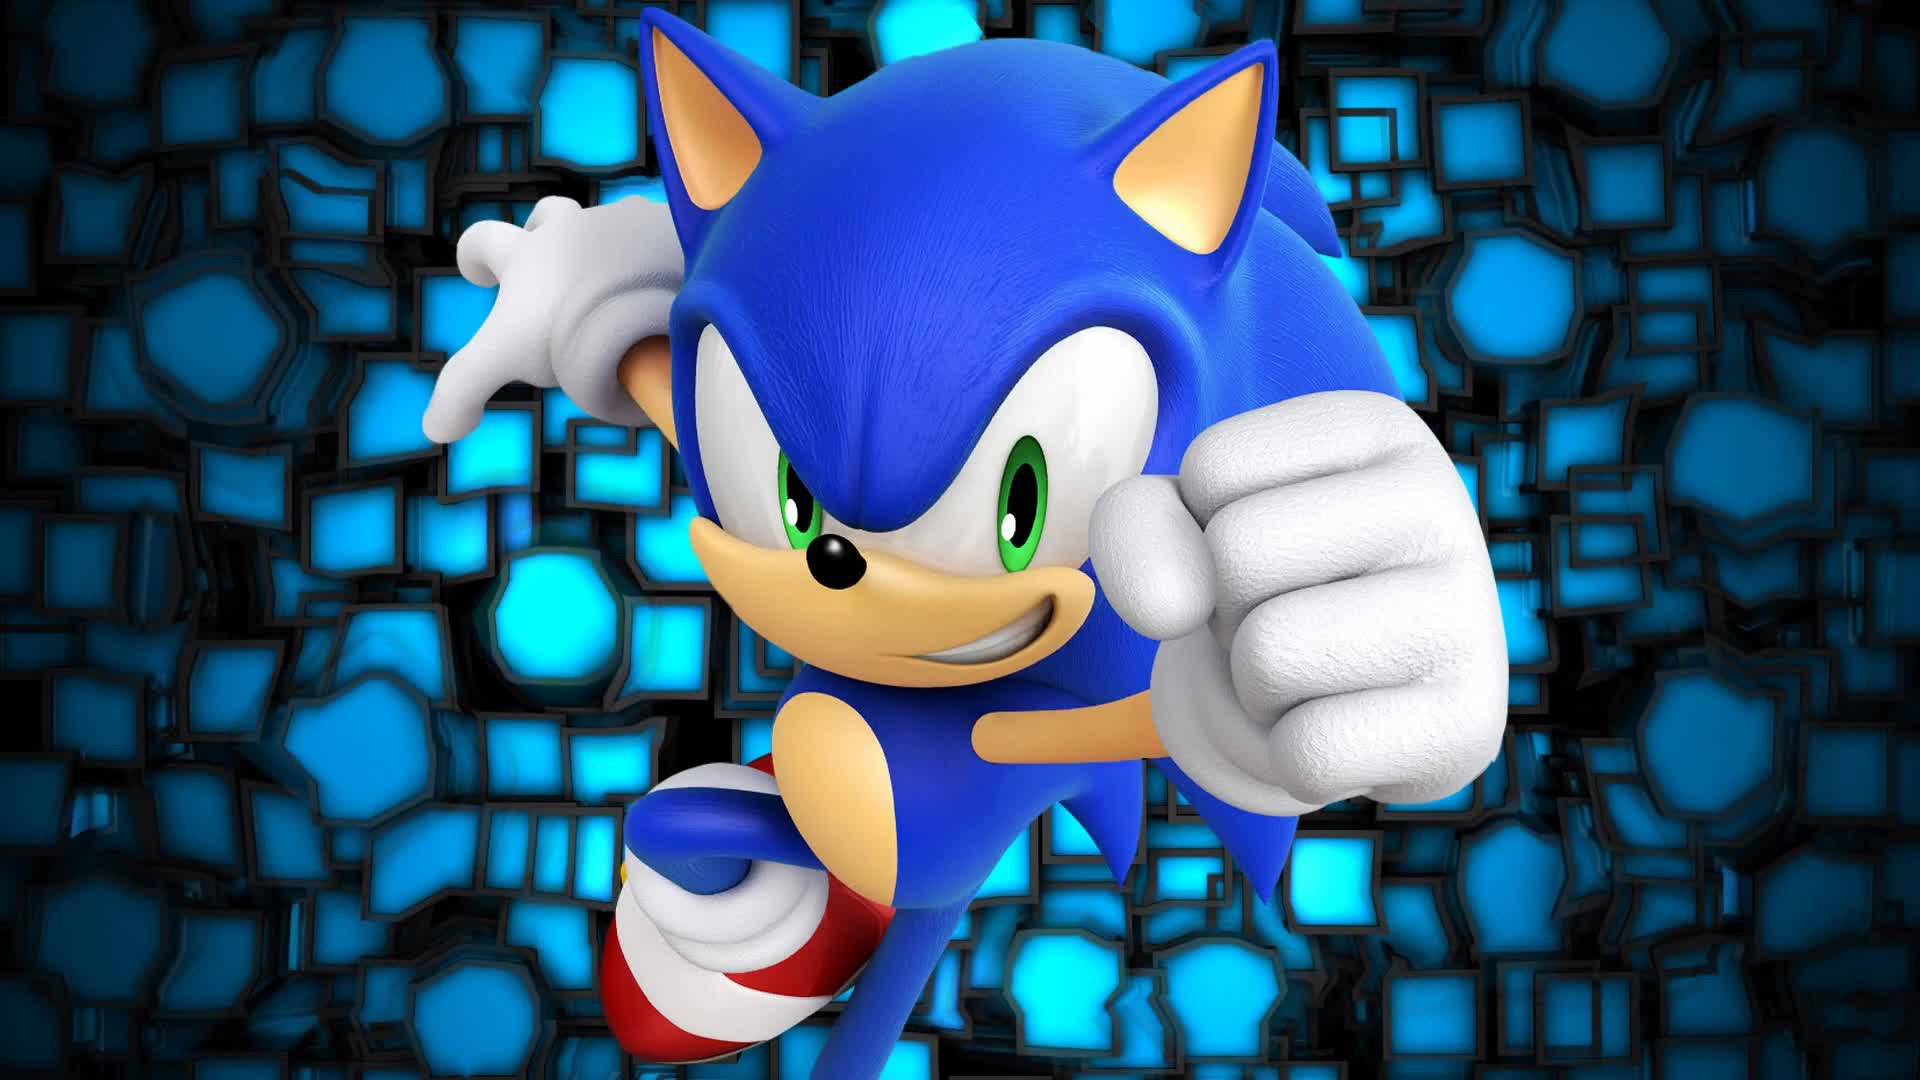 Recent Wallpaper tagged sonic Wallpaper, Animated Wallpaper, Live Wallpaper